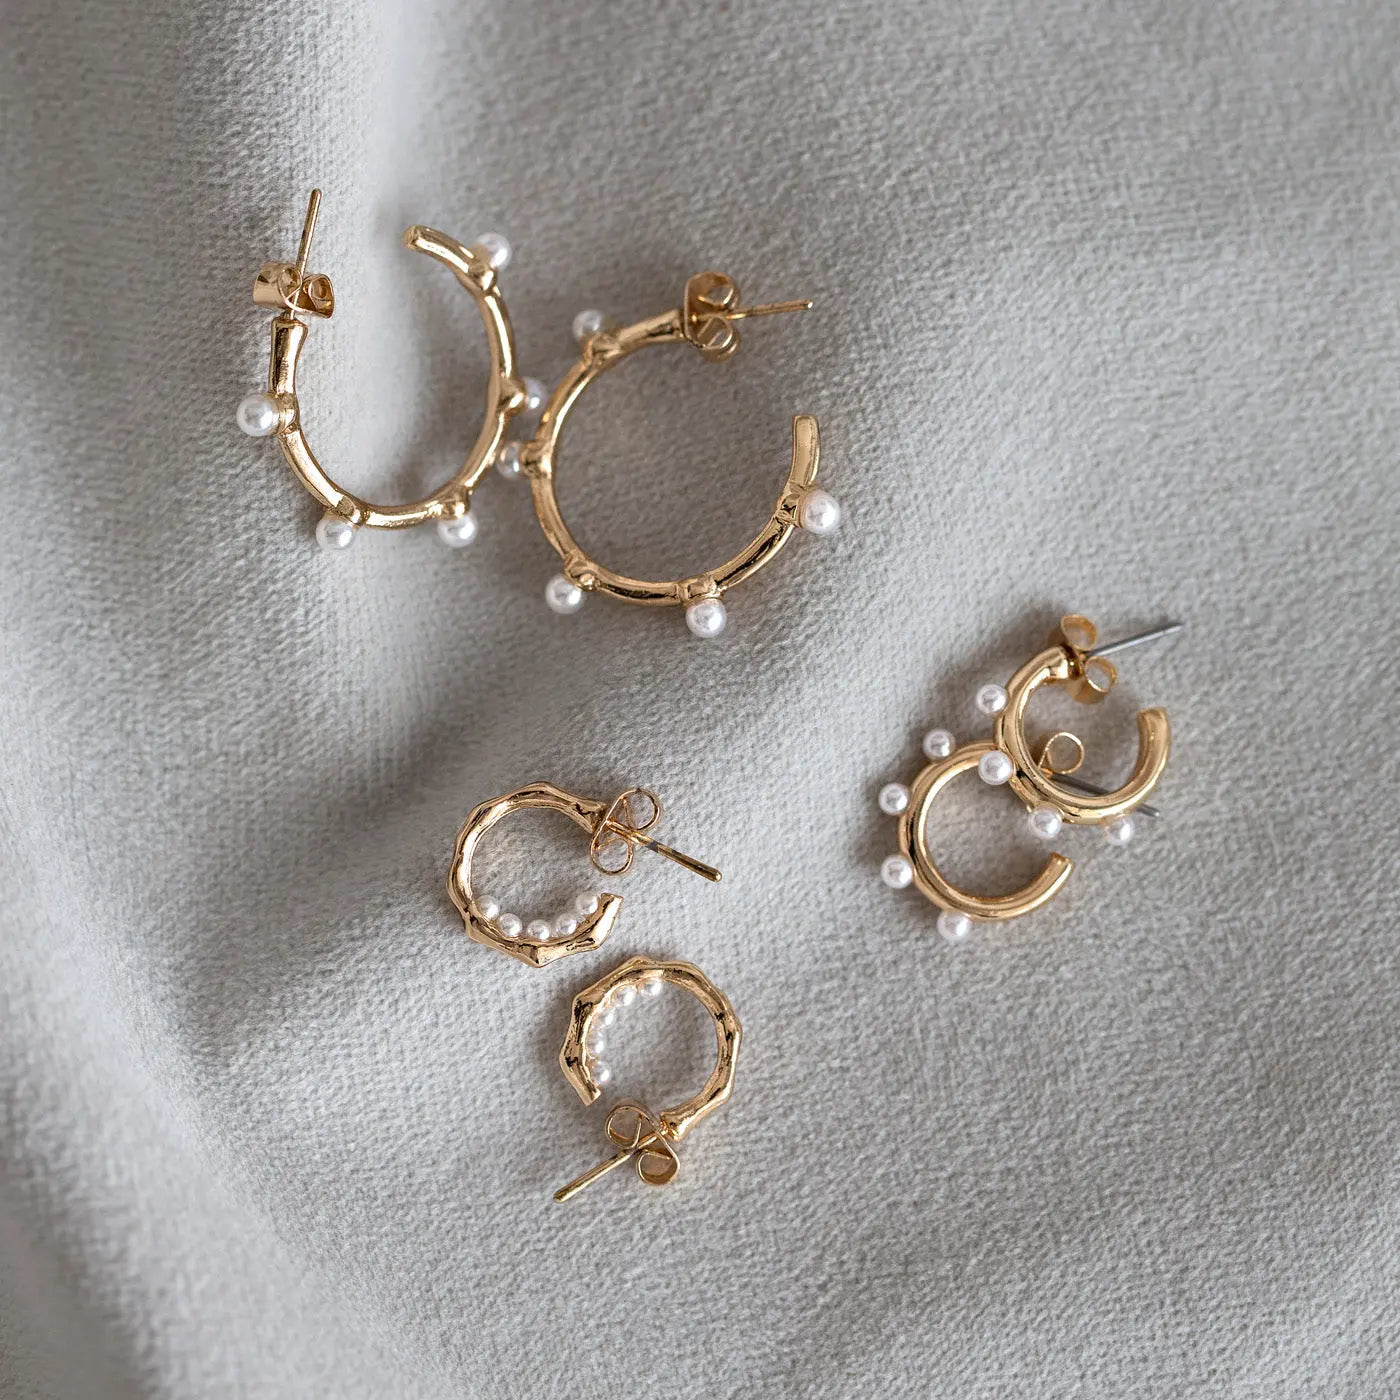 Big hoops with pearl studs